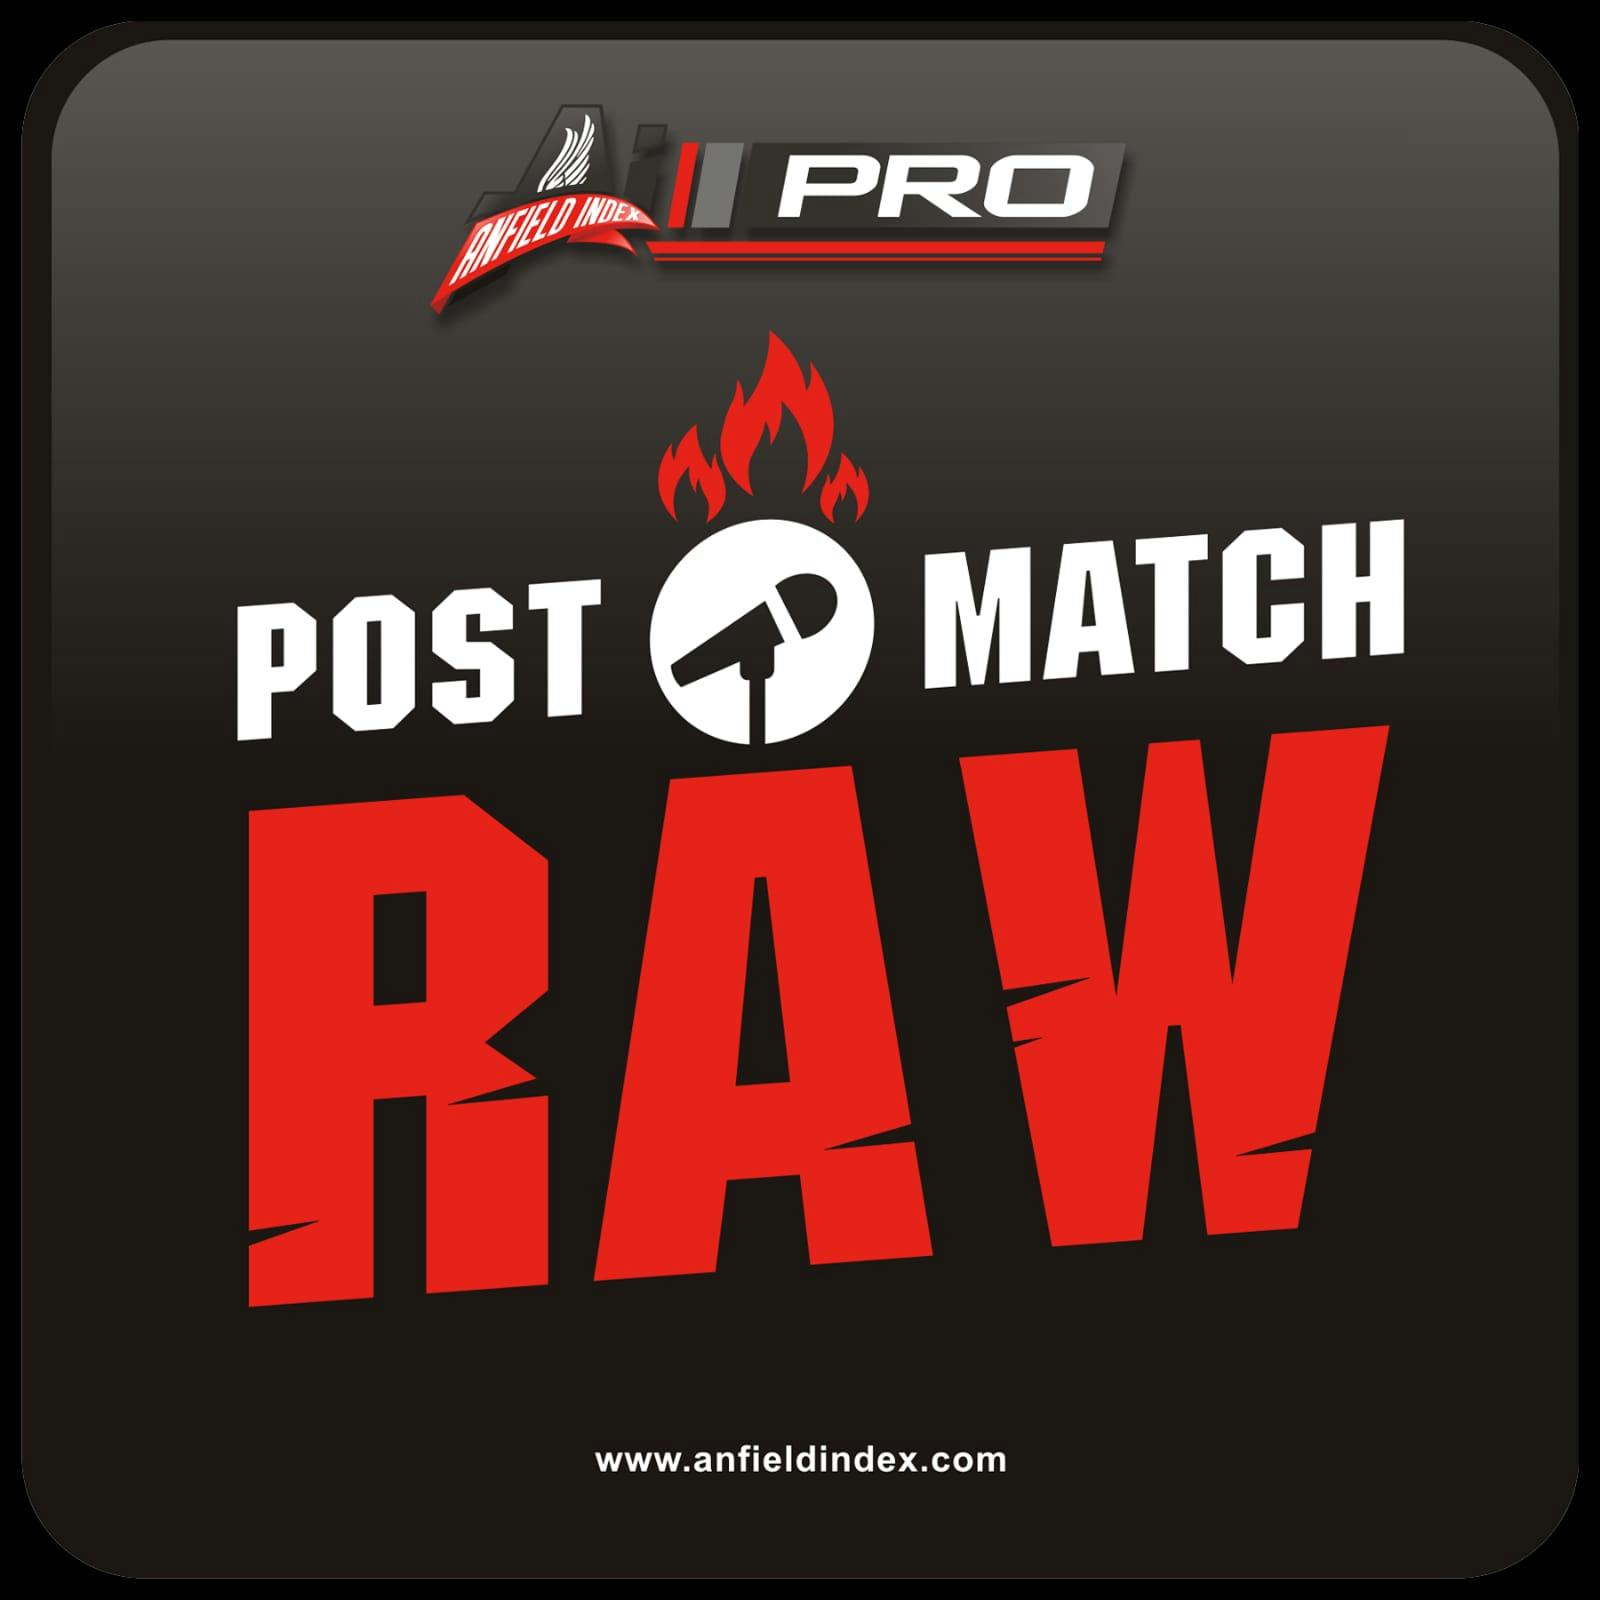 Win Over Tottenham Reaction: Post Match Raw: A NICE REMINDER